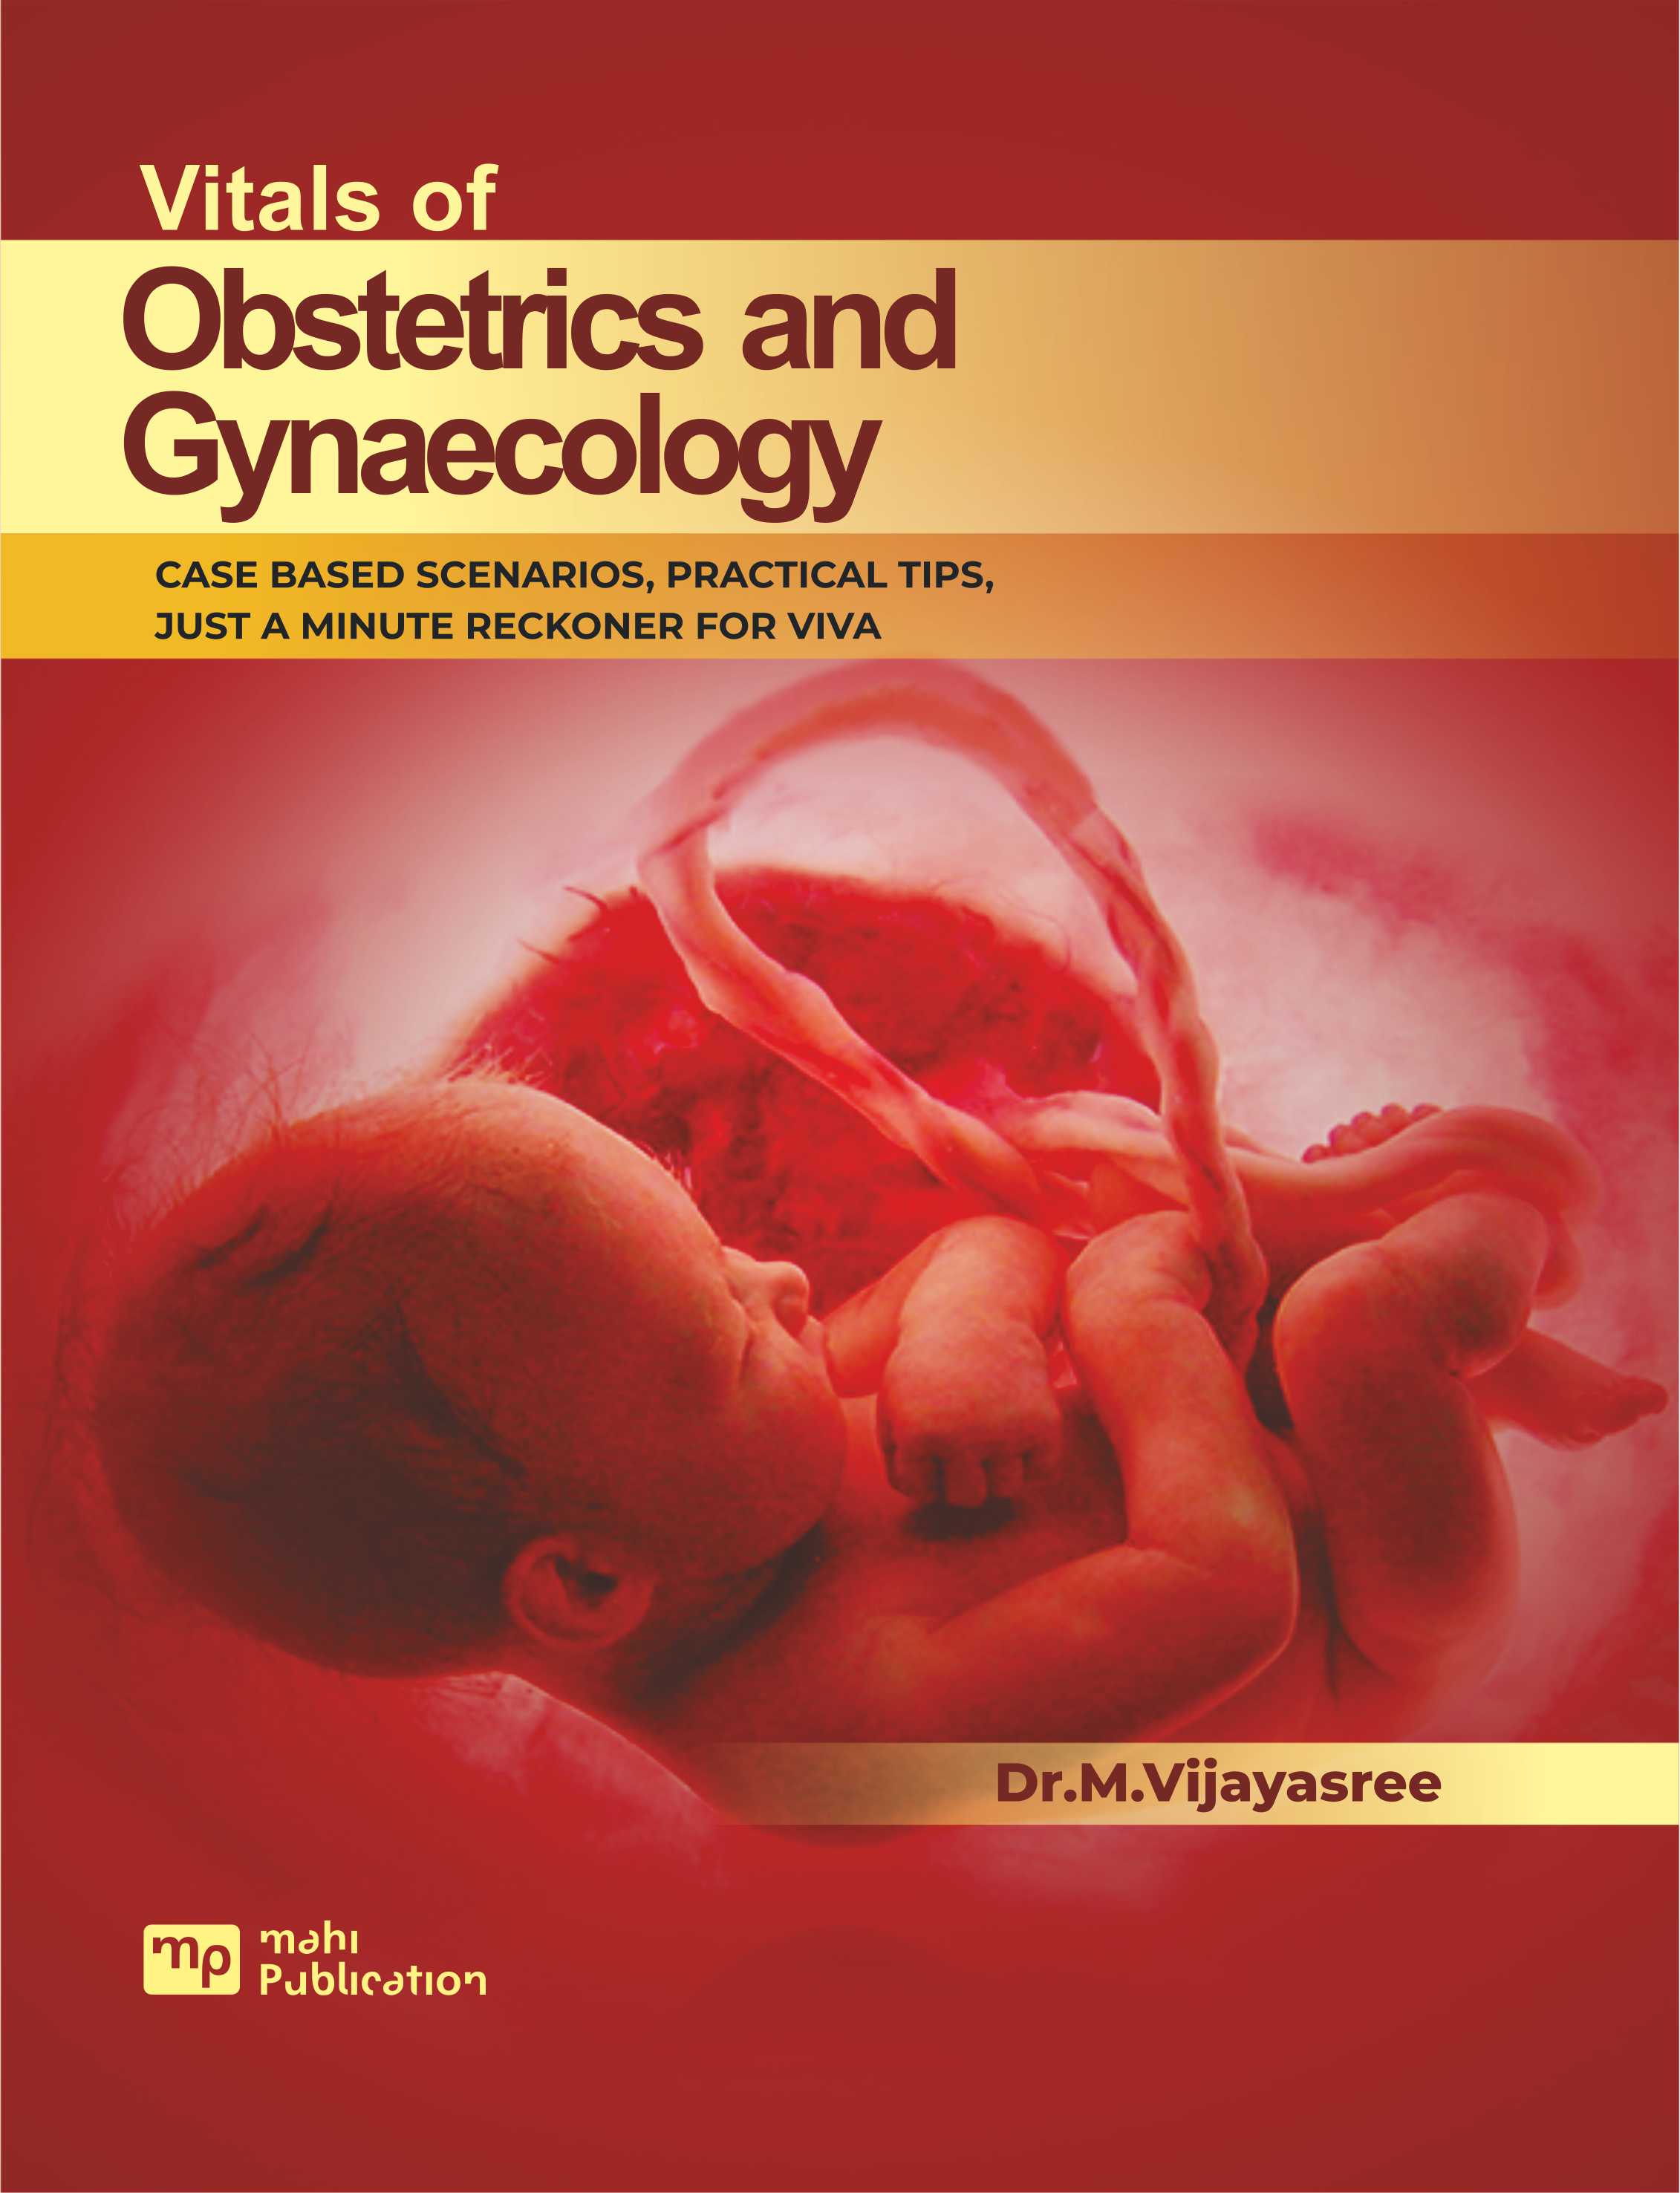 Vitals of Obstetrics and Gynaecology case based Scenarios, Practical tips ,Just a minute Reckoner for Viva